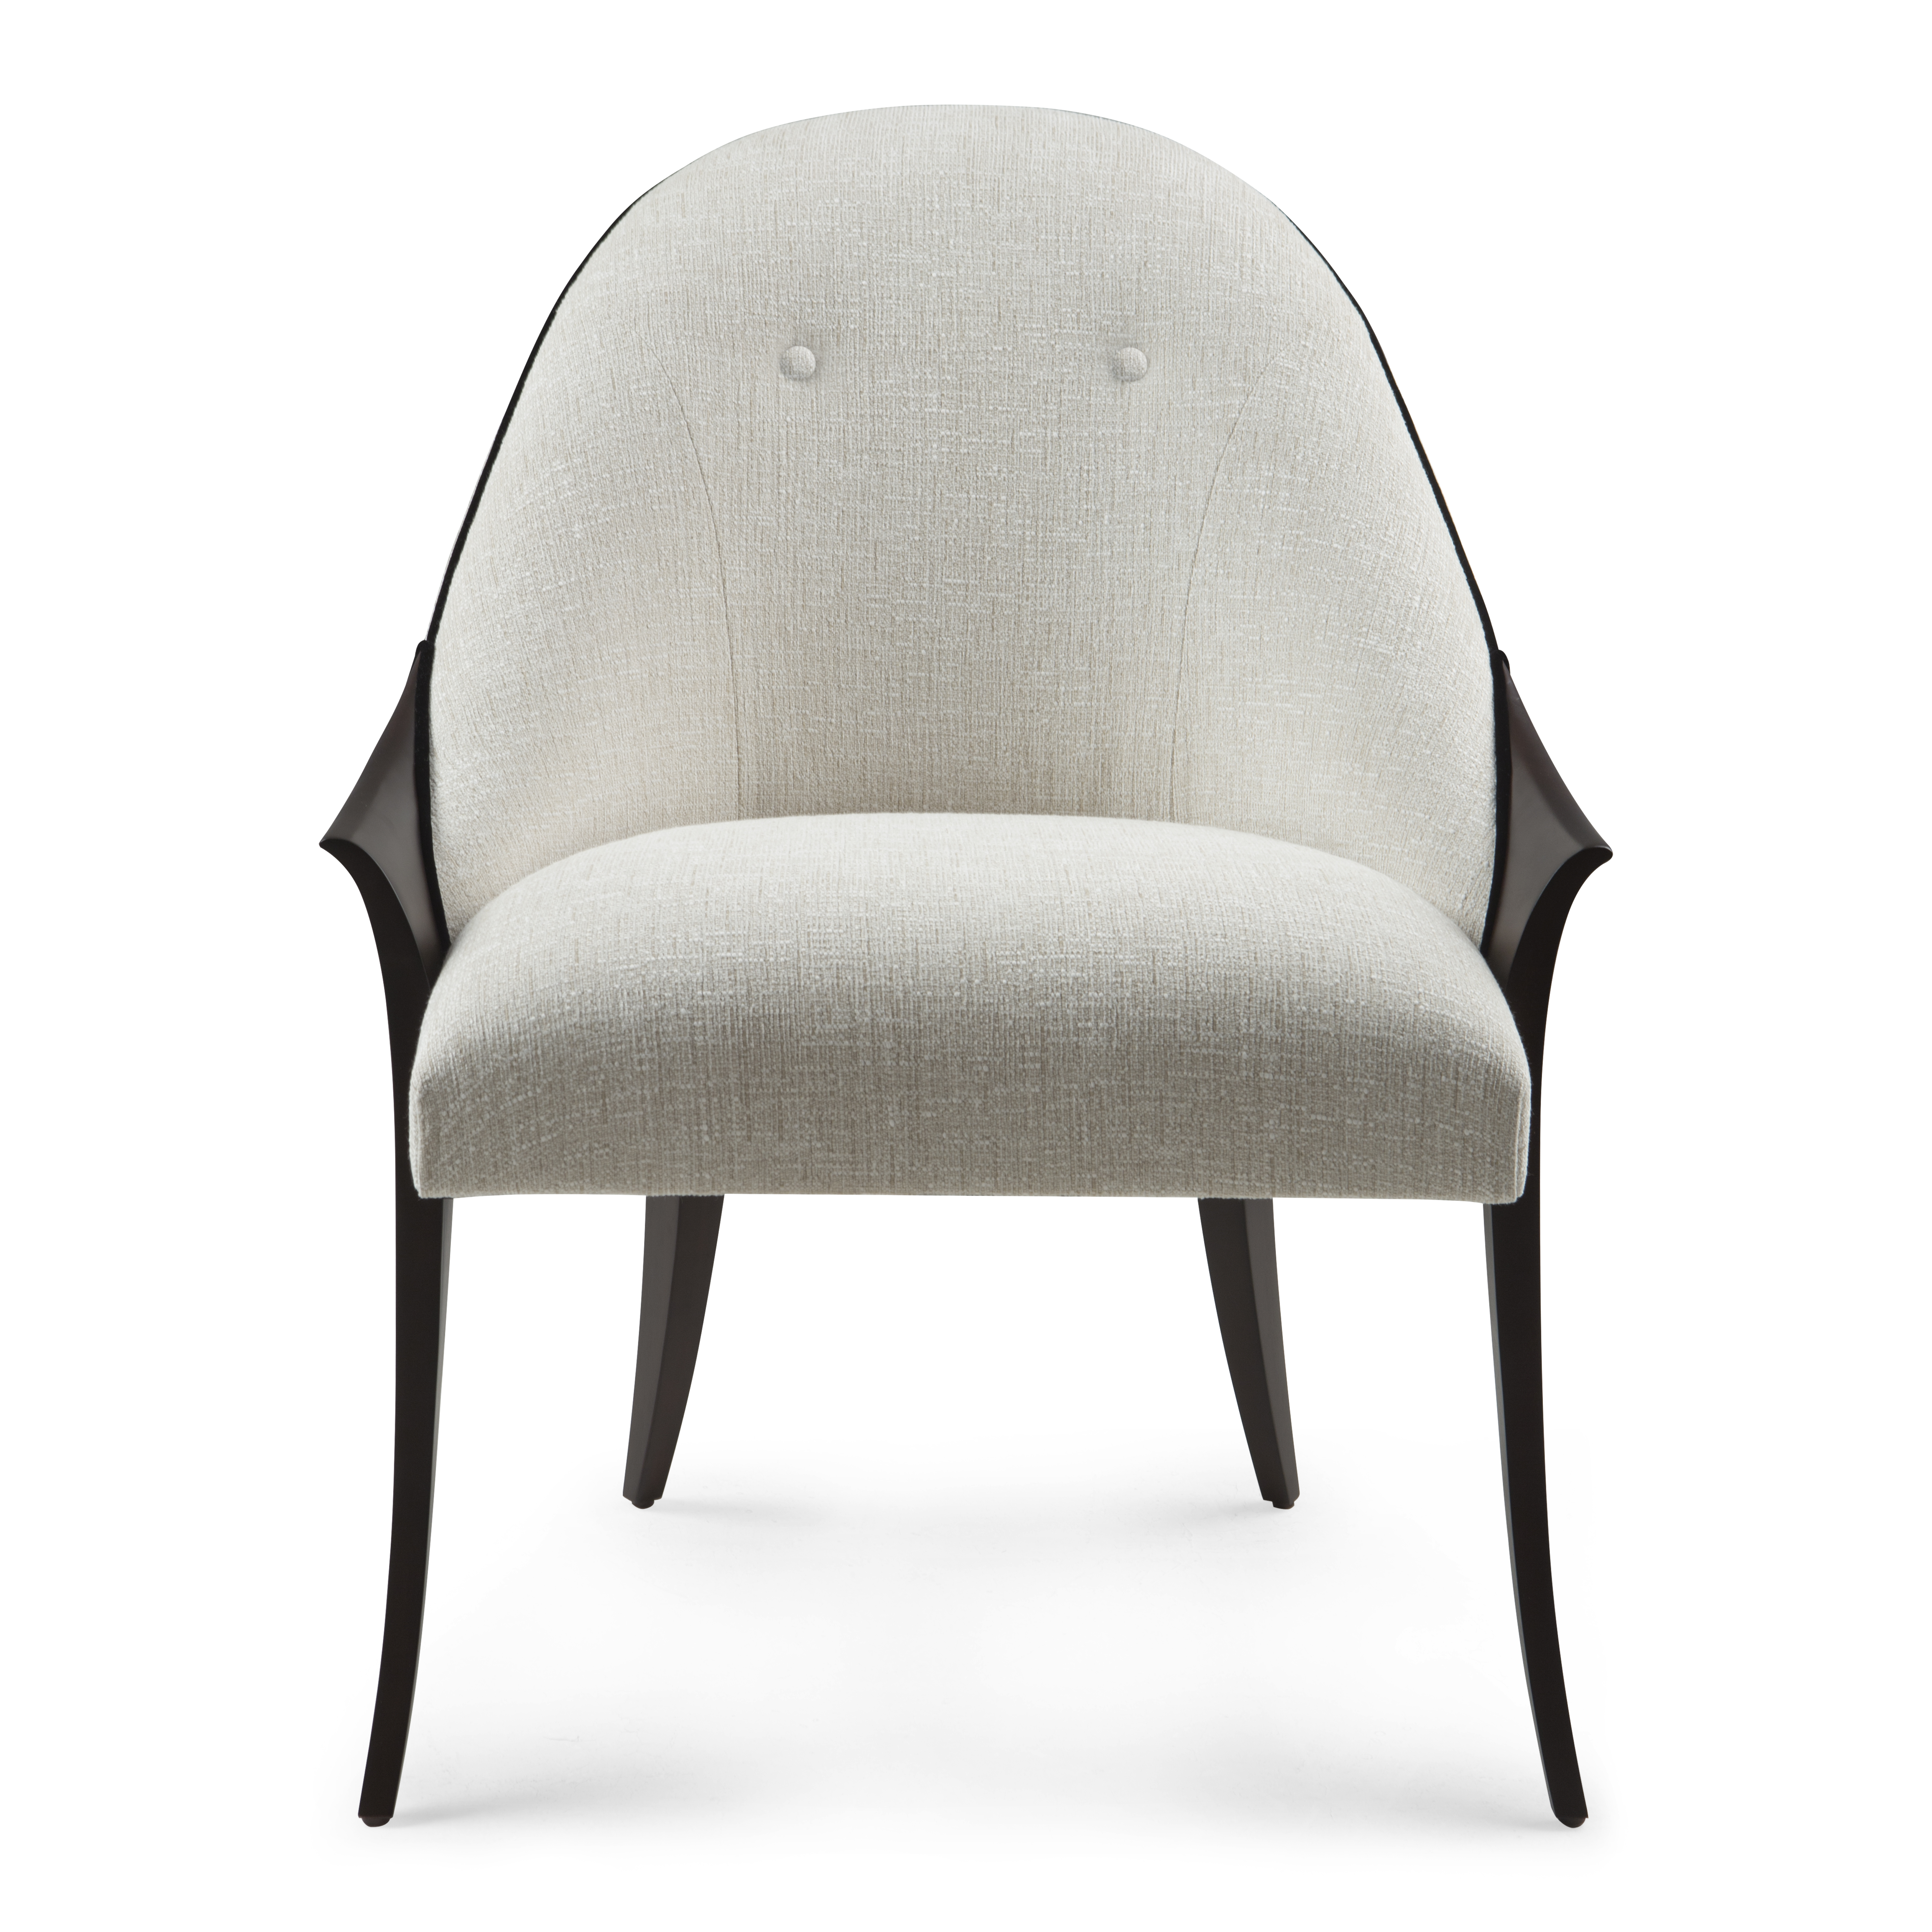 Christopher Guy Especial chair